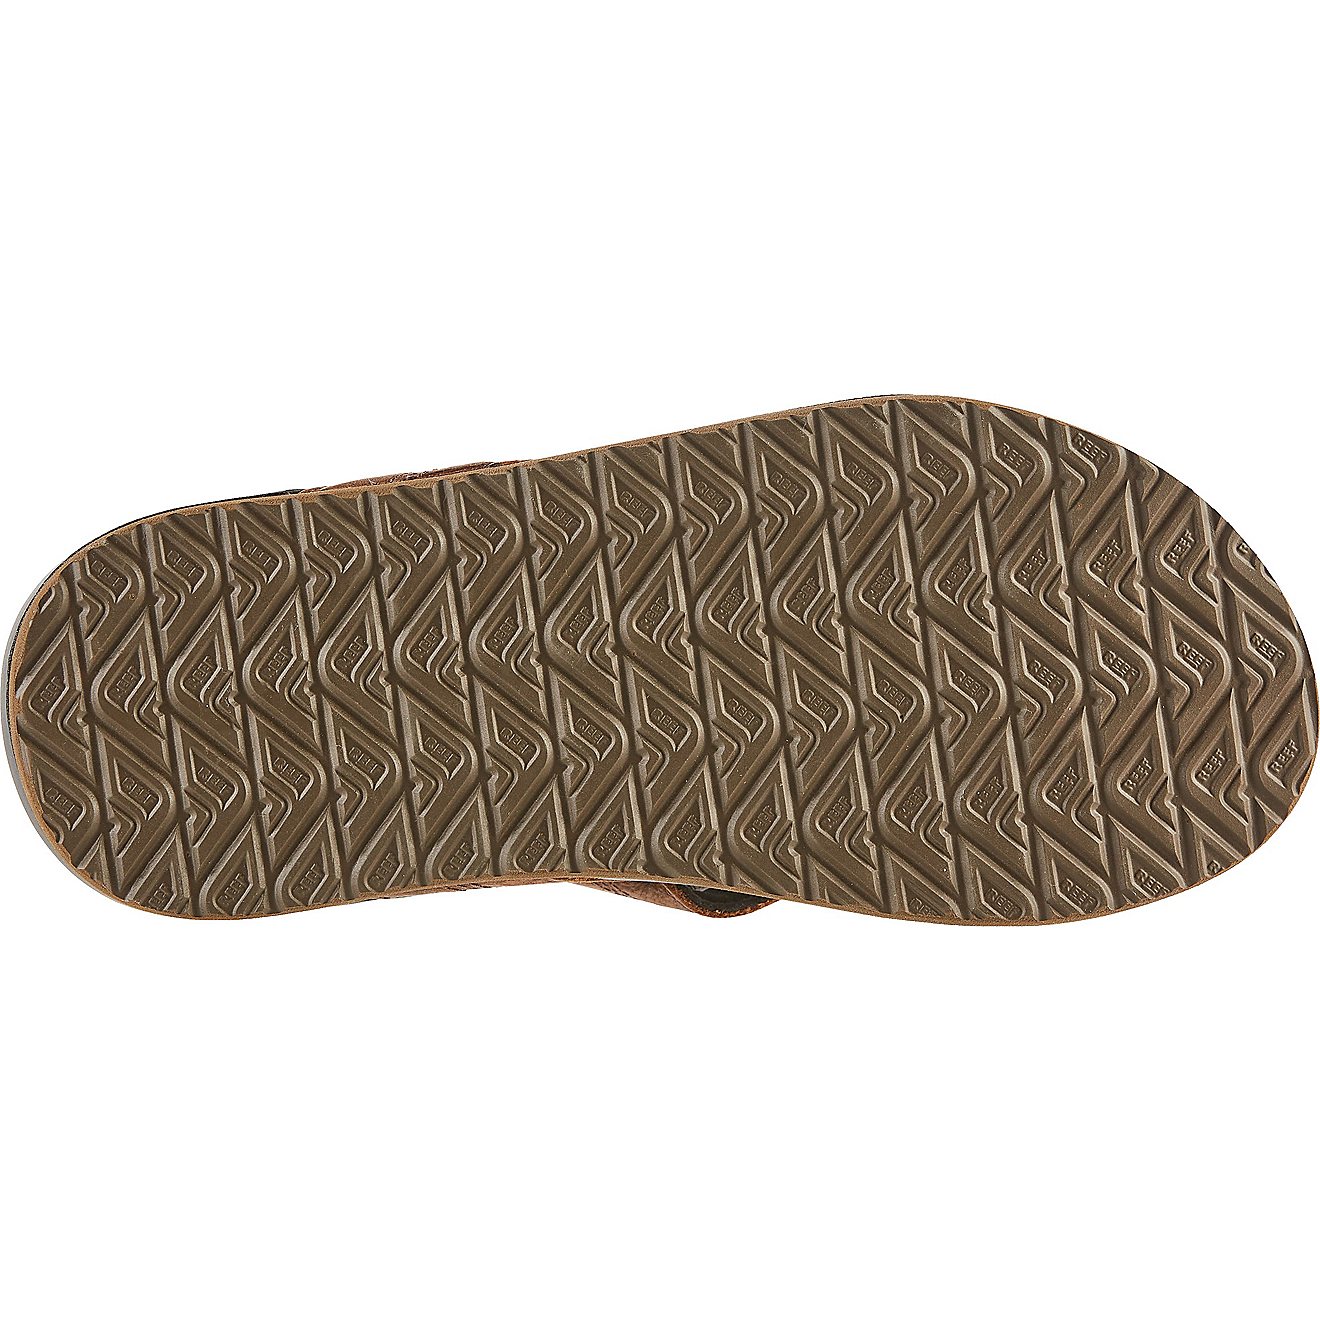 Reef Men's Cushion Phantom LE Sandals | Free Shipping at Academy